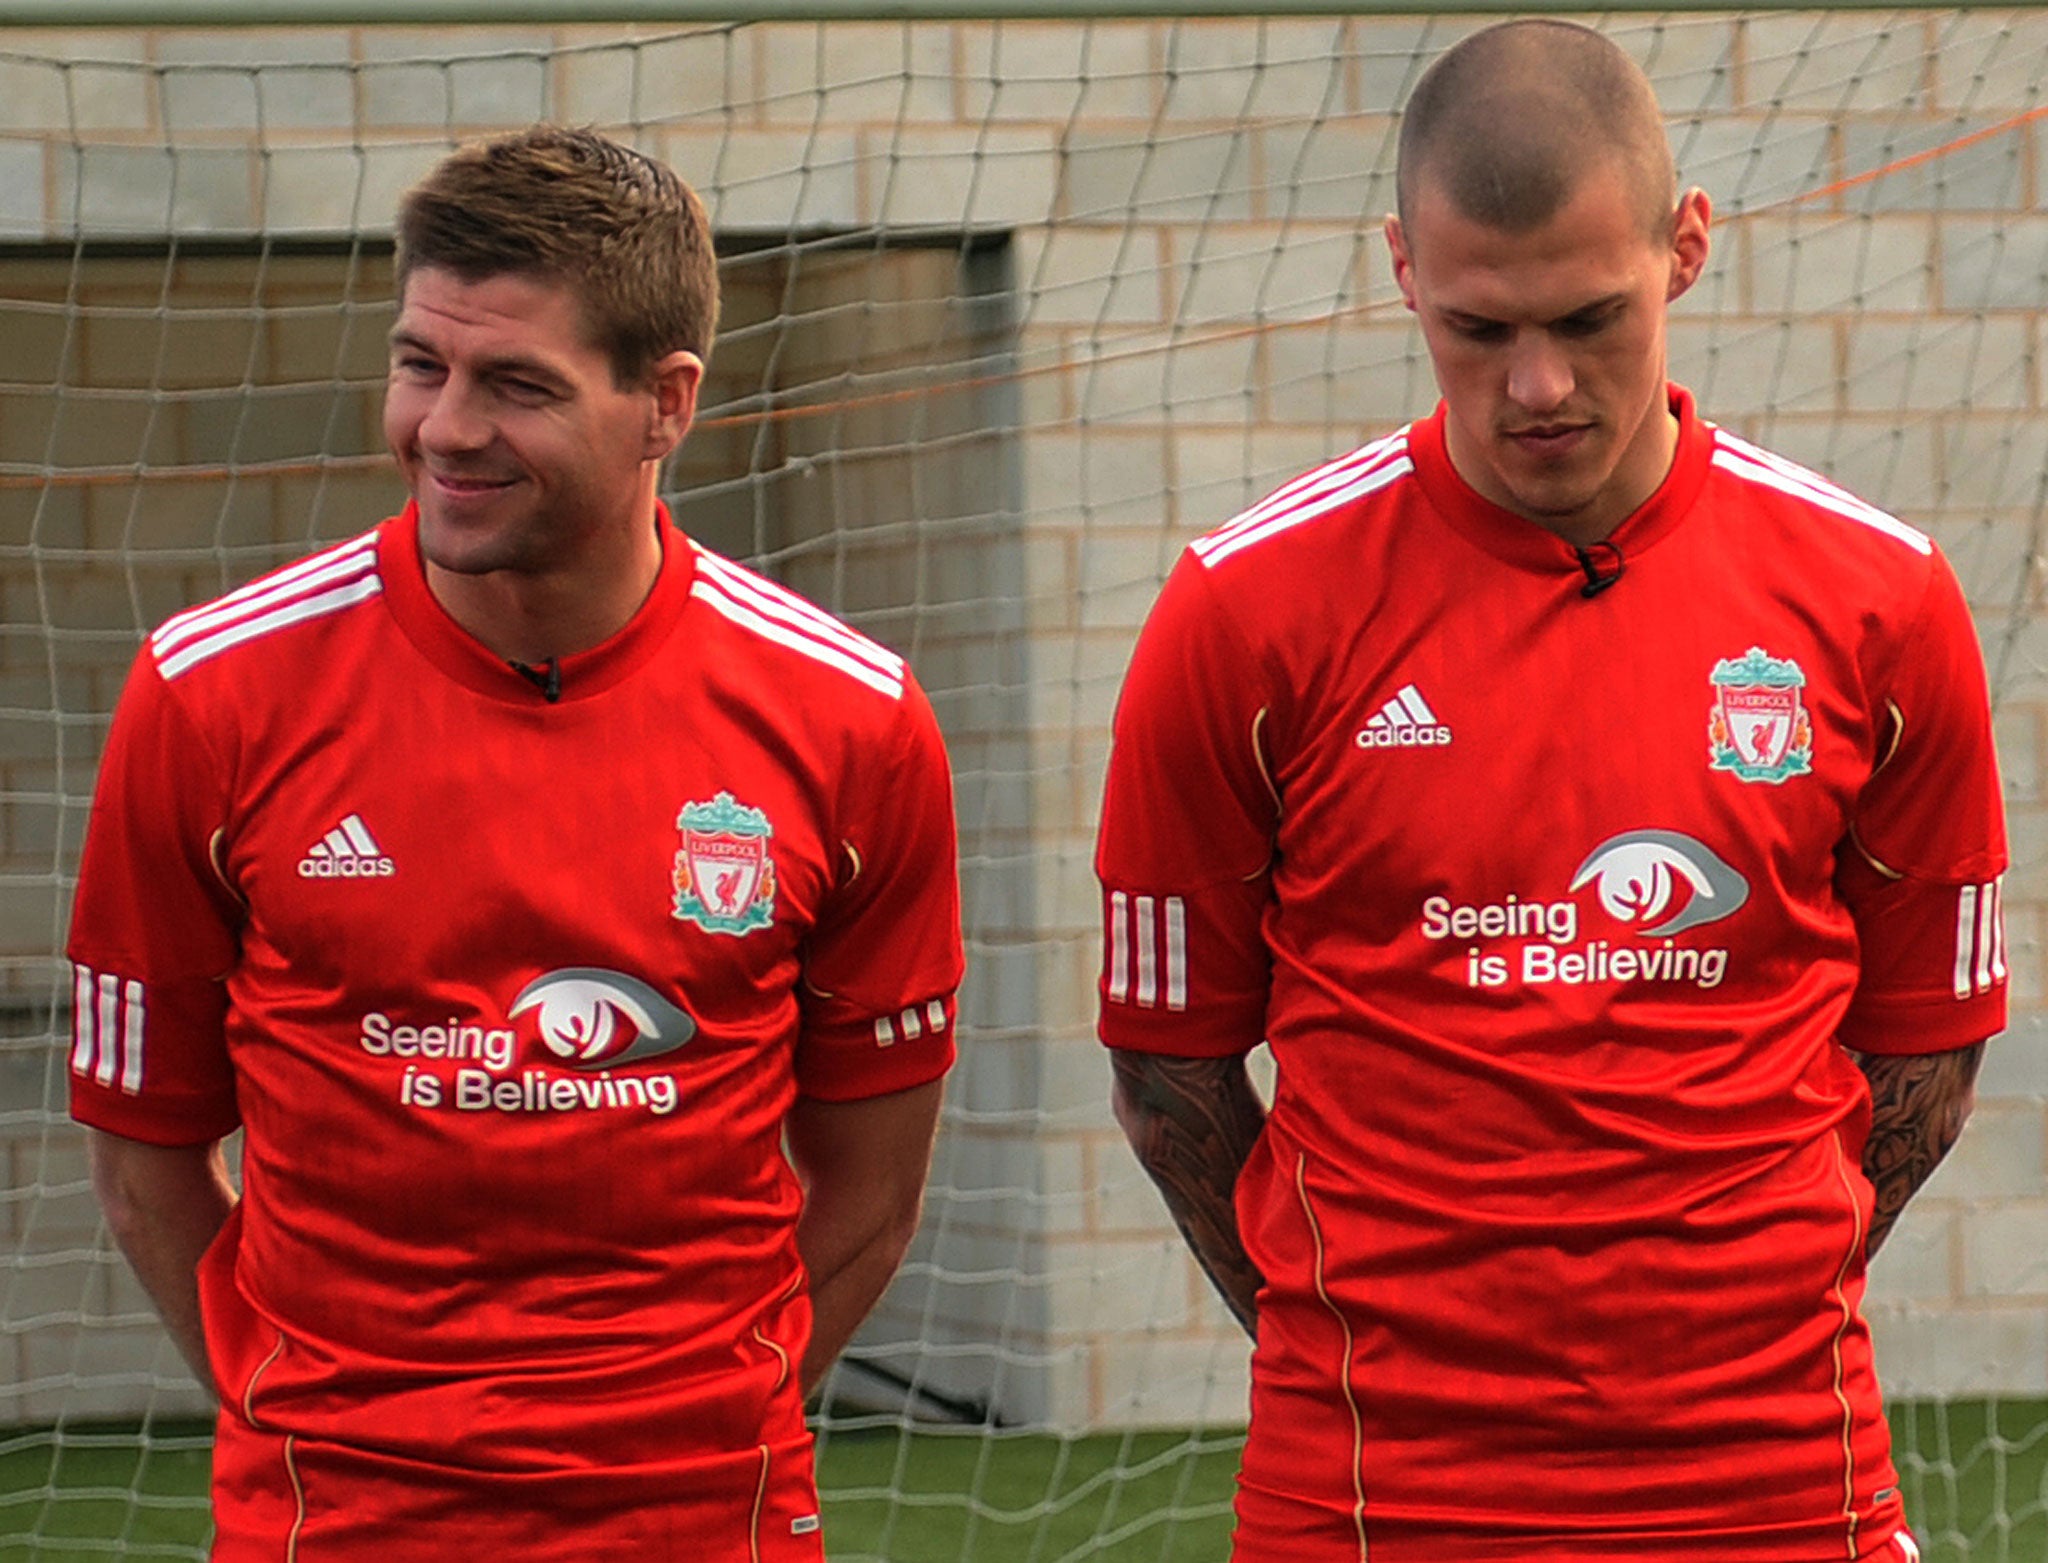 Liverpool's Steven Gerrrard and Martin Skrtel promote the club's Seeing is Believing campaign